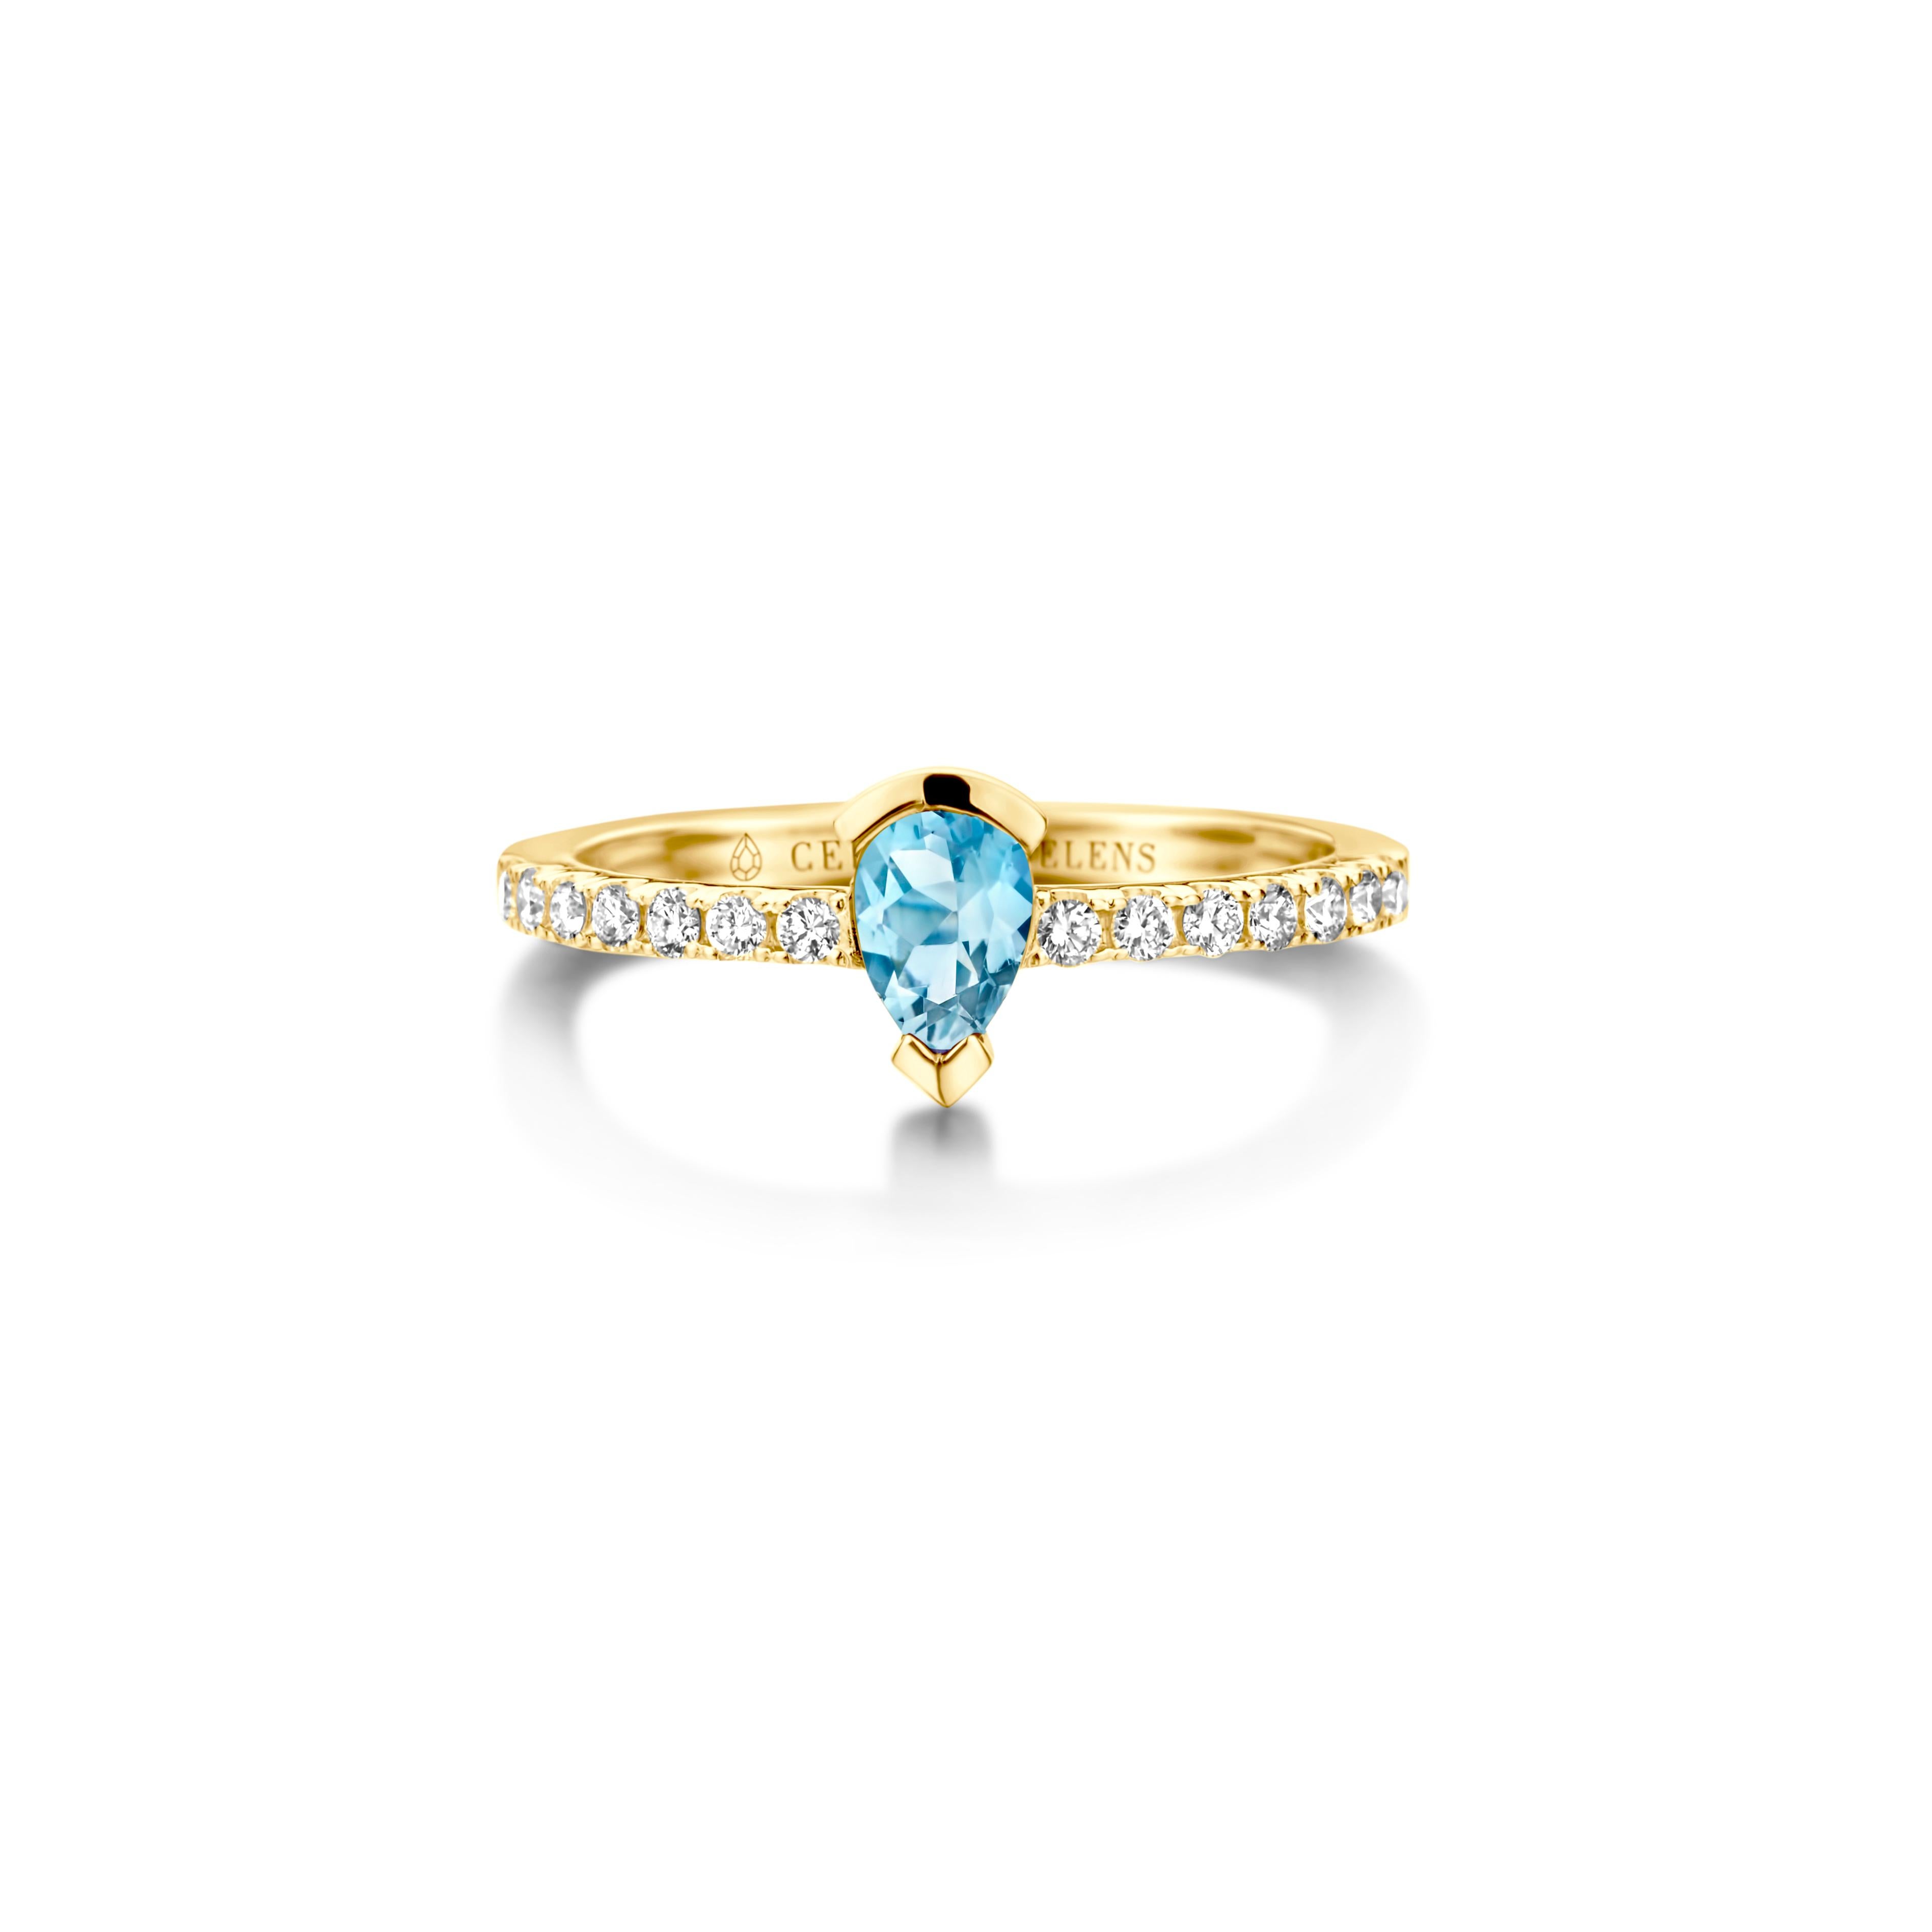 Adeline Straight ring in 18Kt white gold set with a pear-shaped aquamarine and 0,24 Ct of white brilliant cut diamonds - VS F quality. Also, available in yellow gold and white gold. Celine Roelens, a goldsmith and gemologist, is specialized in